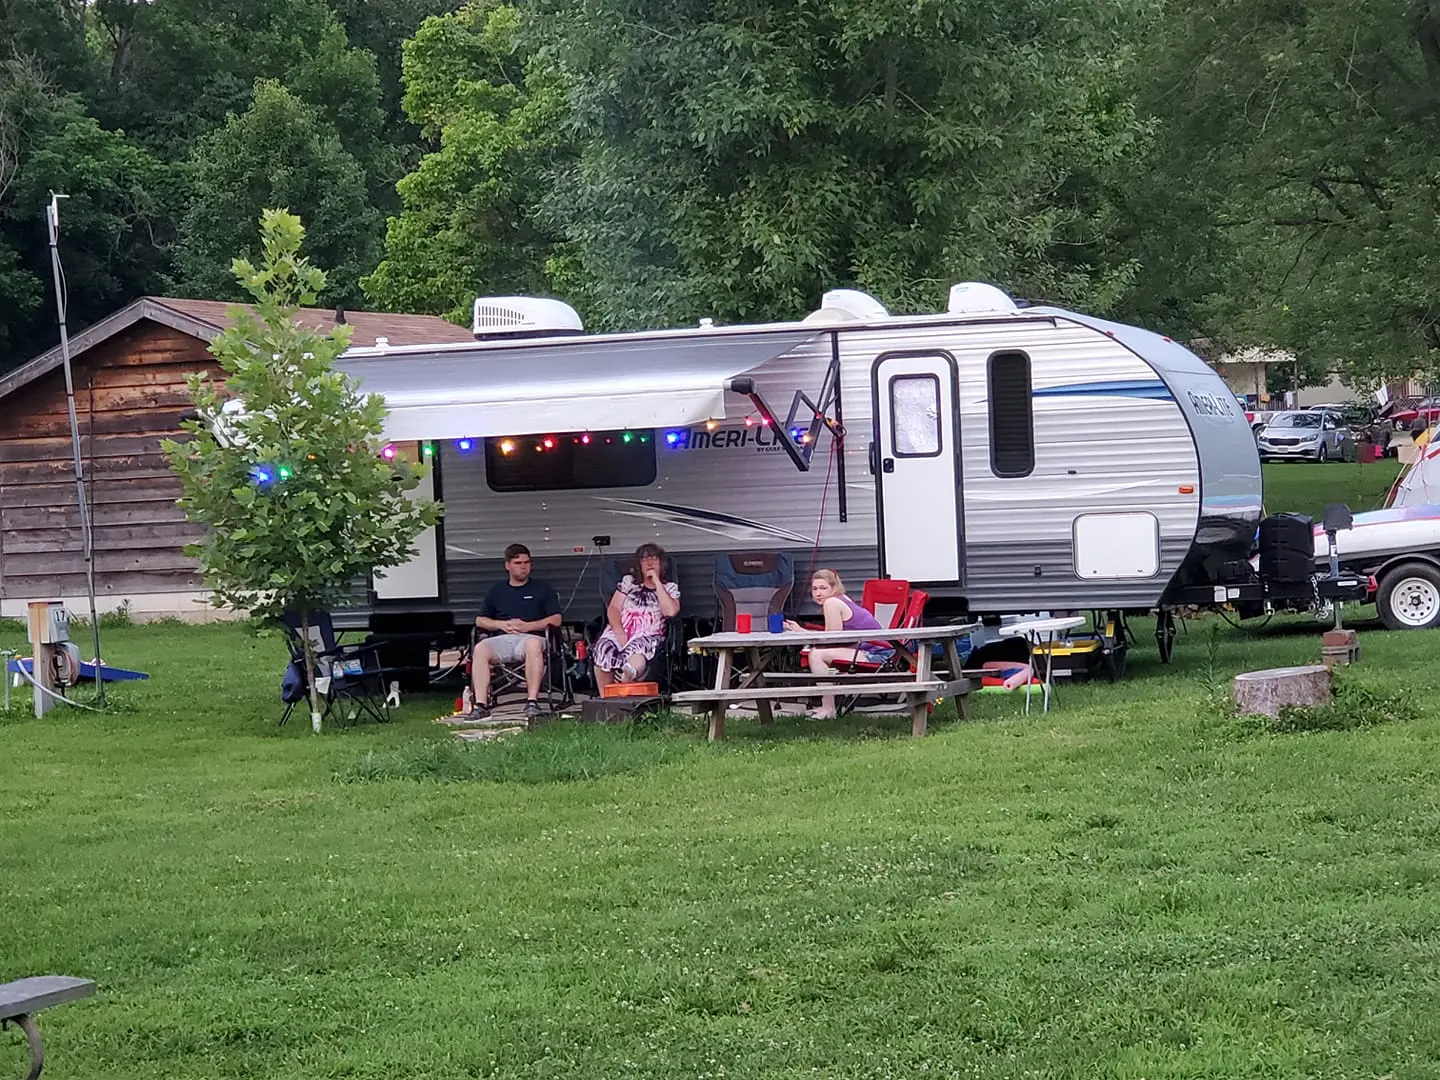 Family relaxing outside a camper trailer at a campsite, with chairs, a table, and a barbecue grill, surrounded by trees.